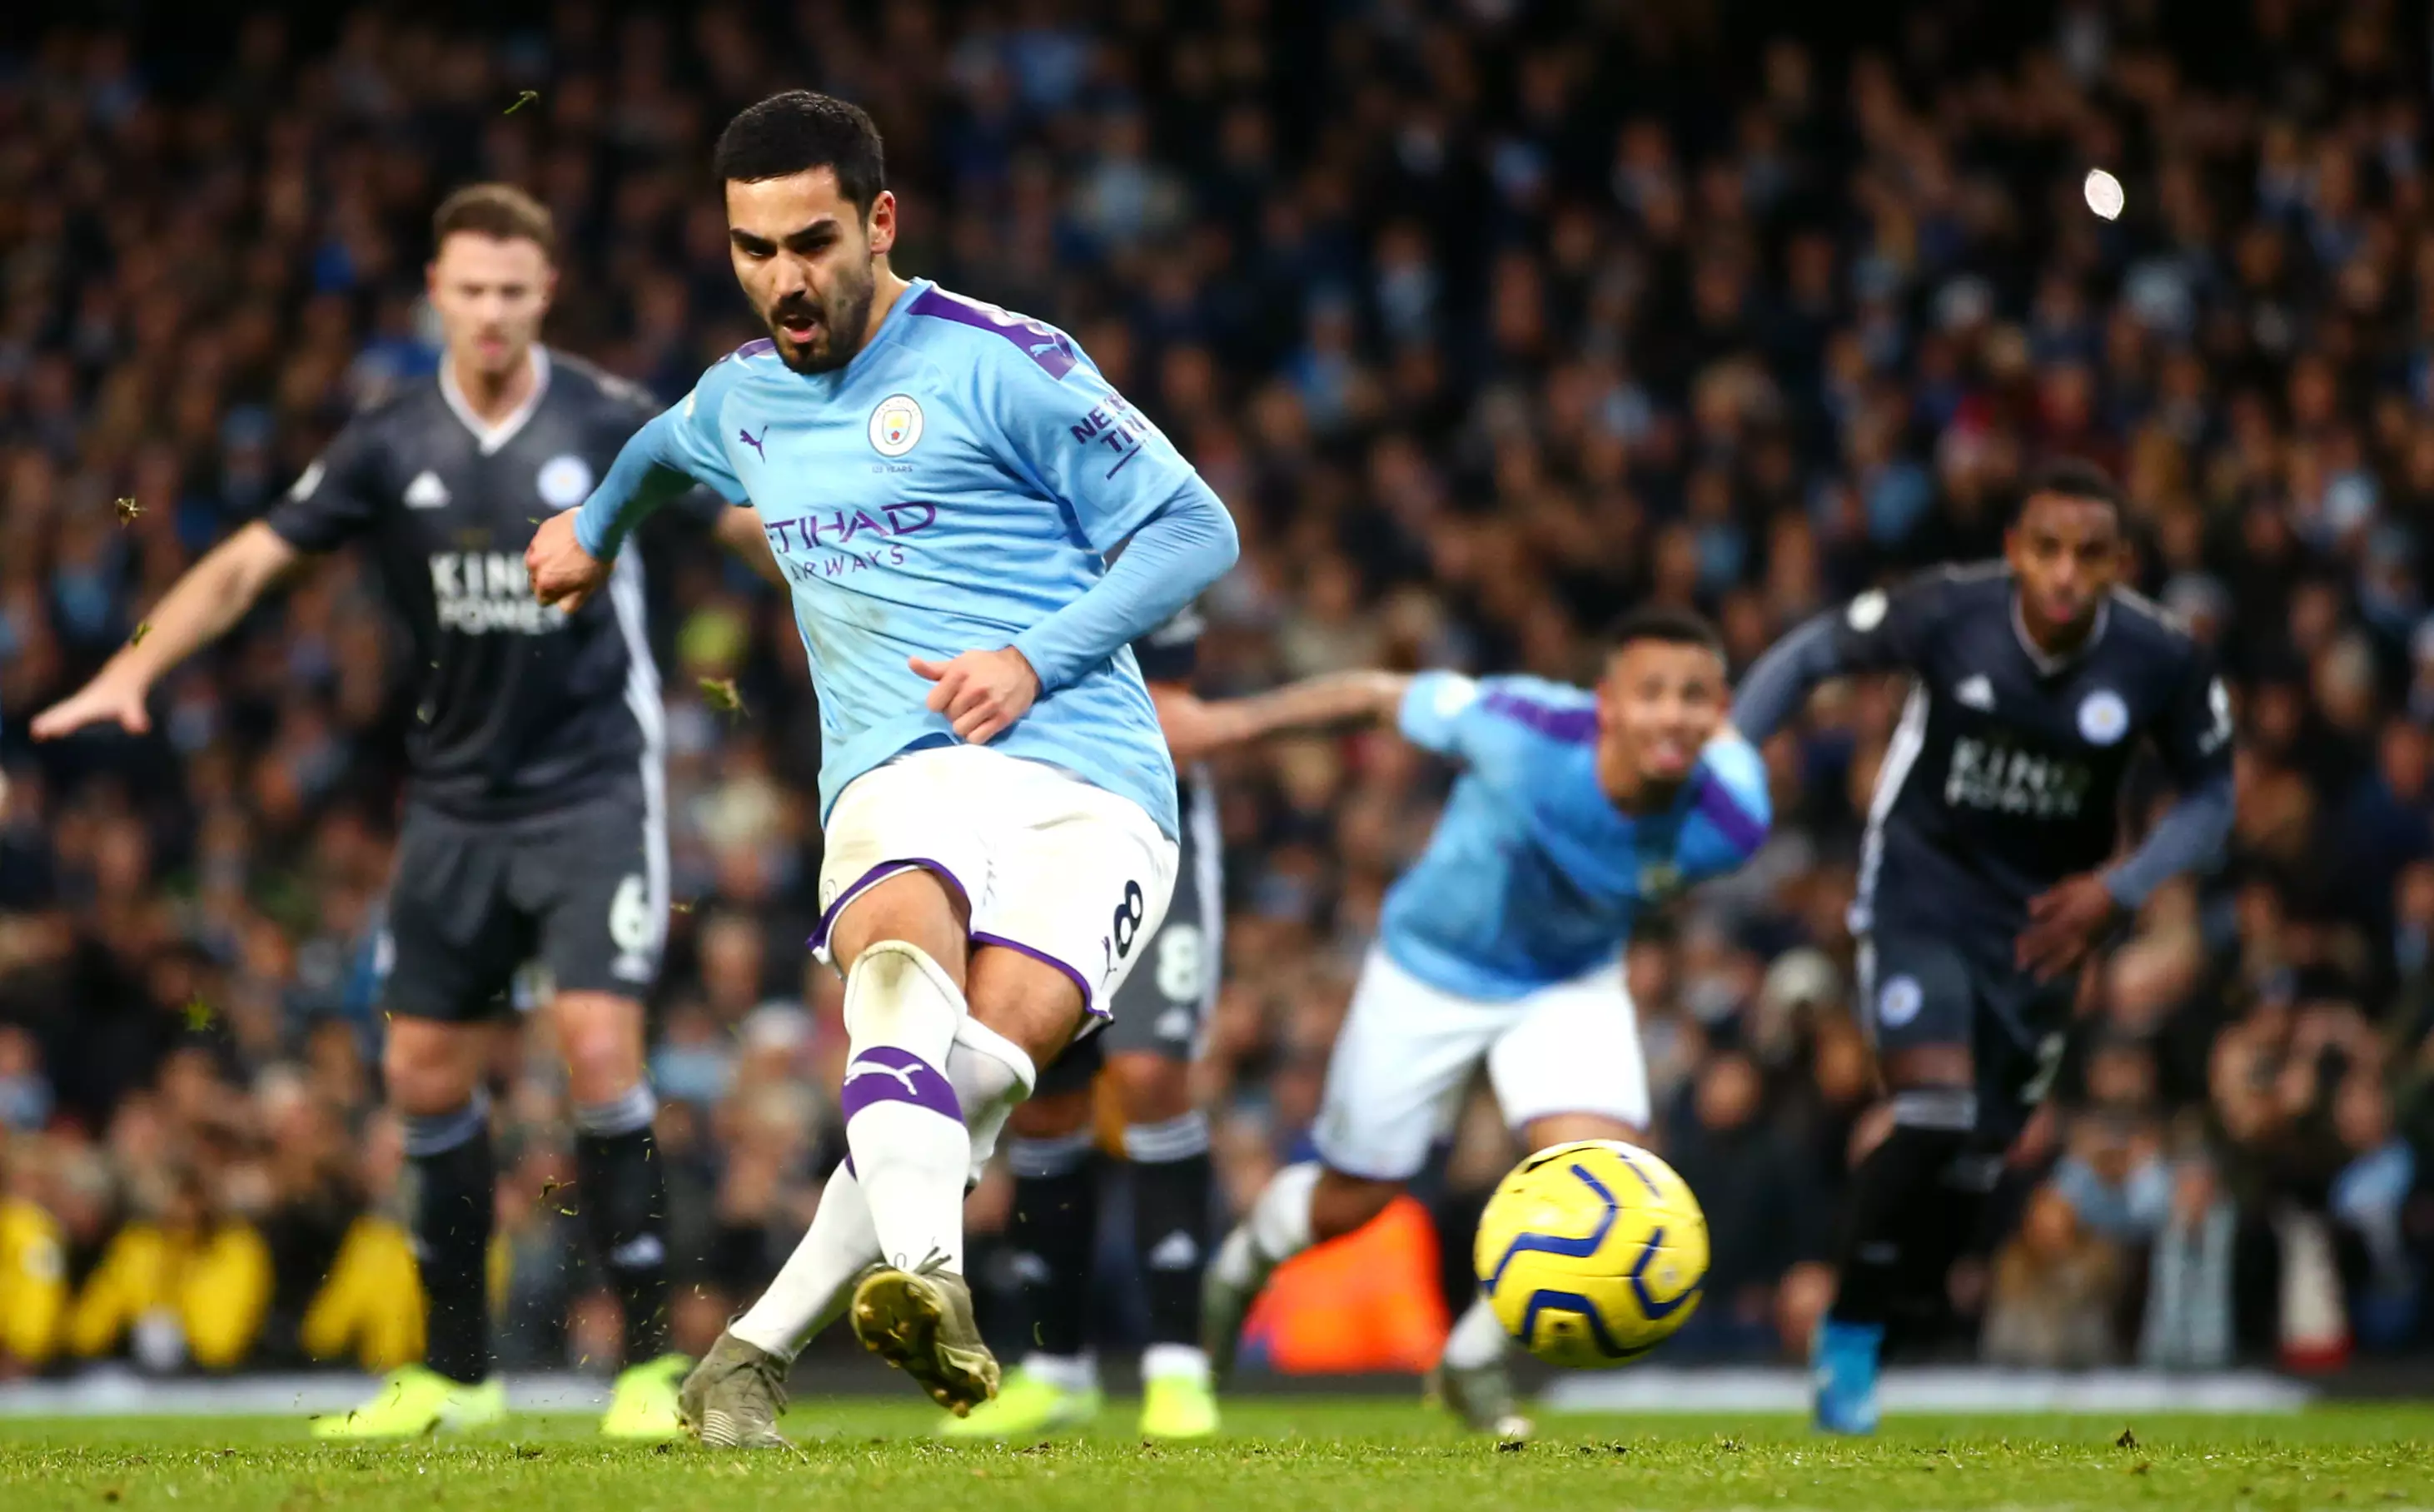 Ilkay Gundogan is one of four players to play for both Pep Guardiola and Jurgen Klopp